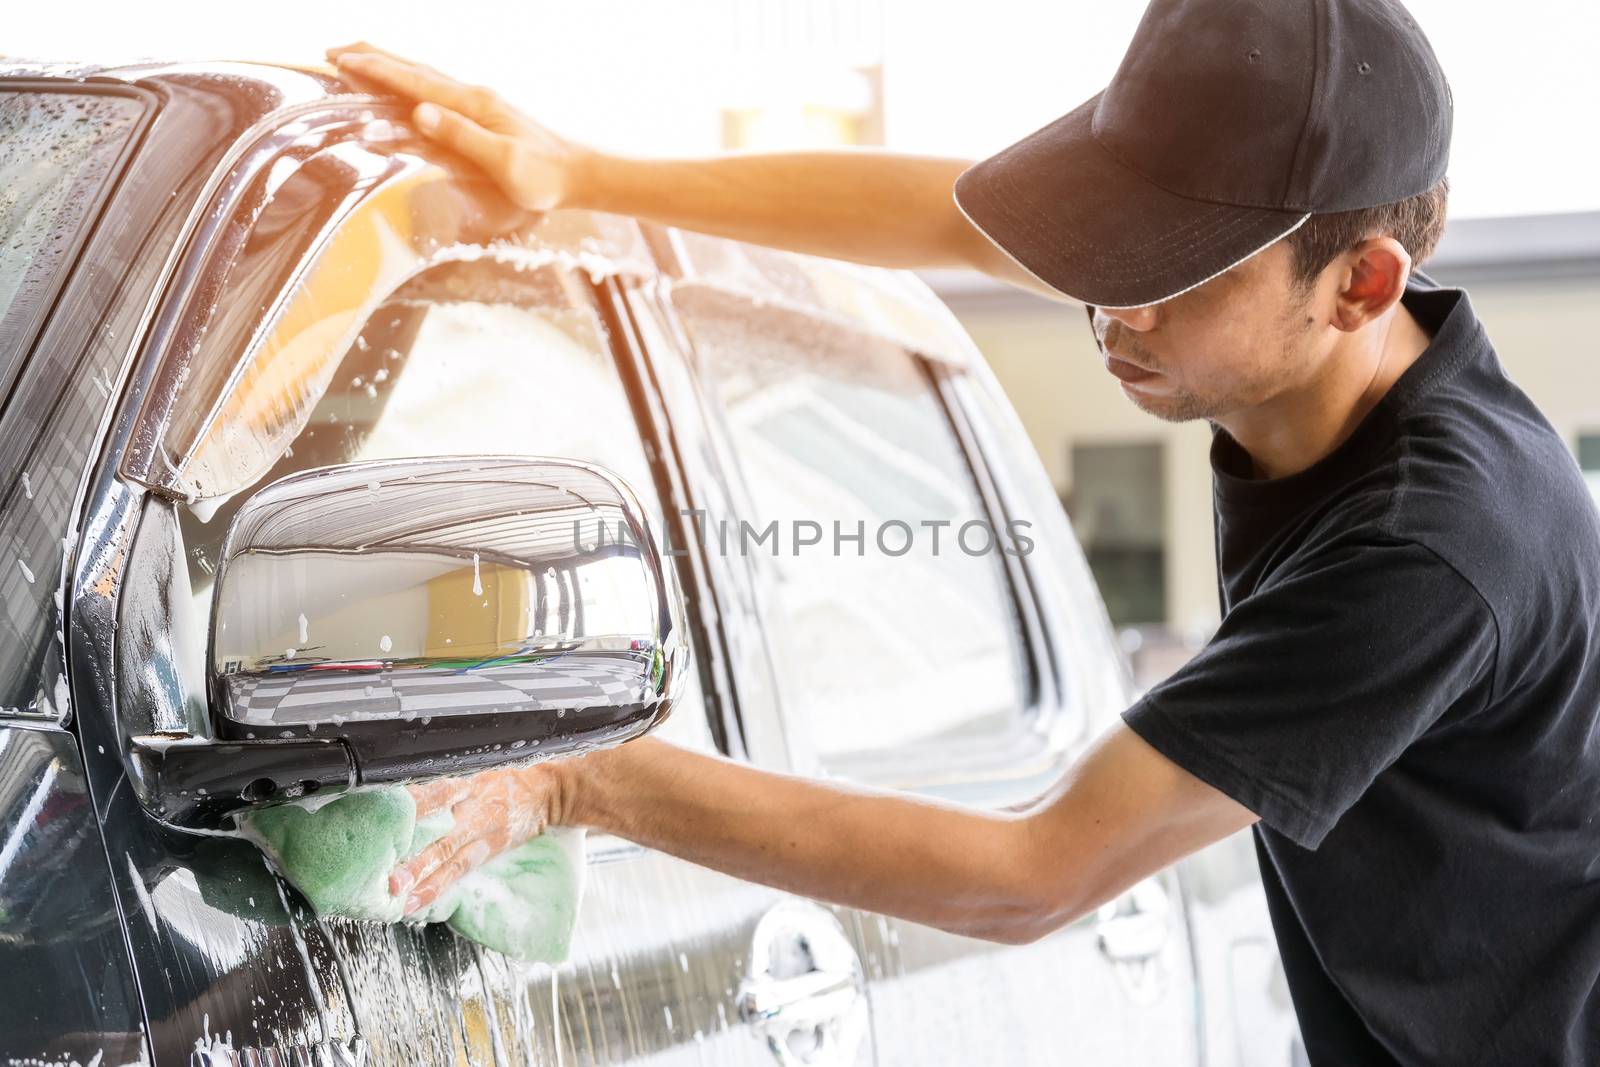 Car wash worker wearing a T-shirt and a black cap is using a sponge to clean the car in the car wash center, concept for car care industry.